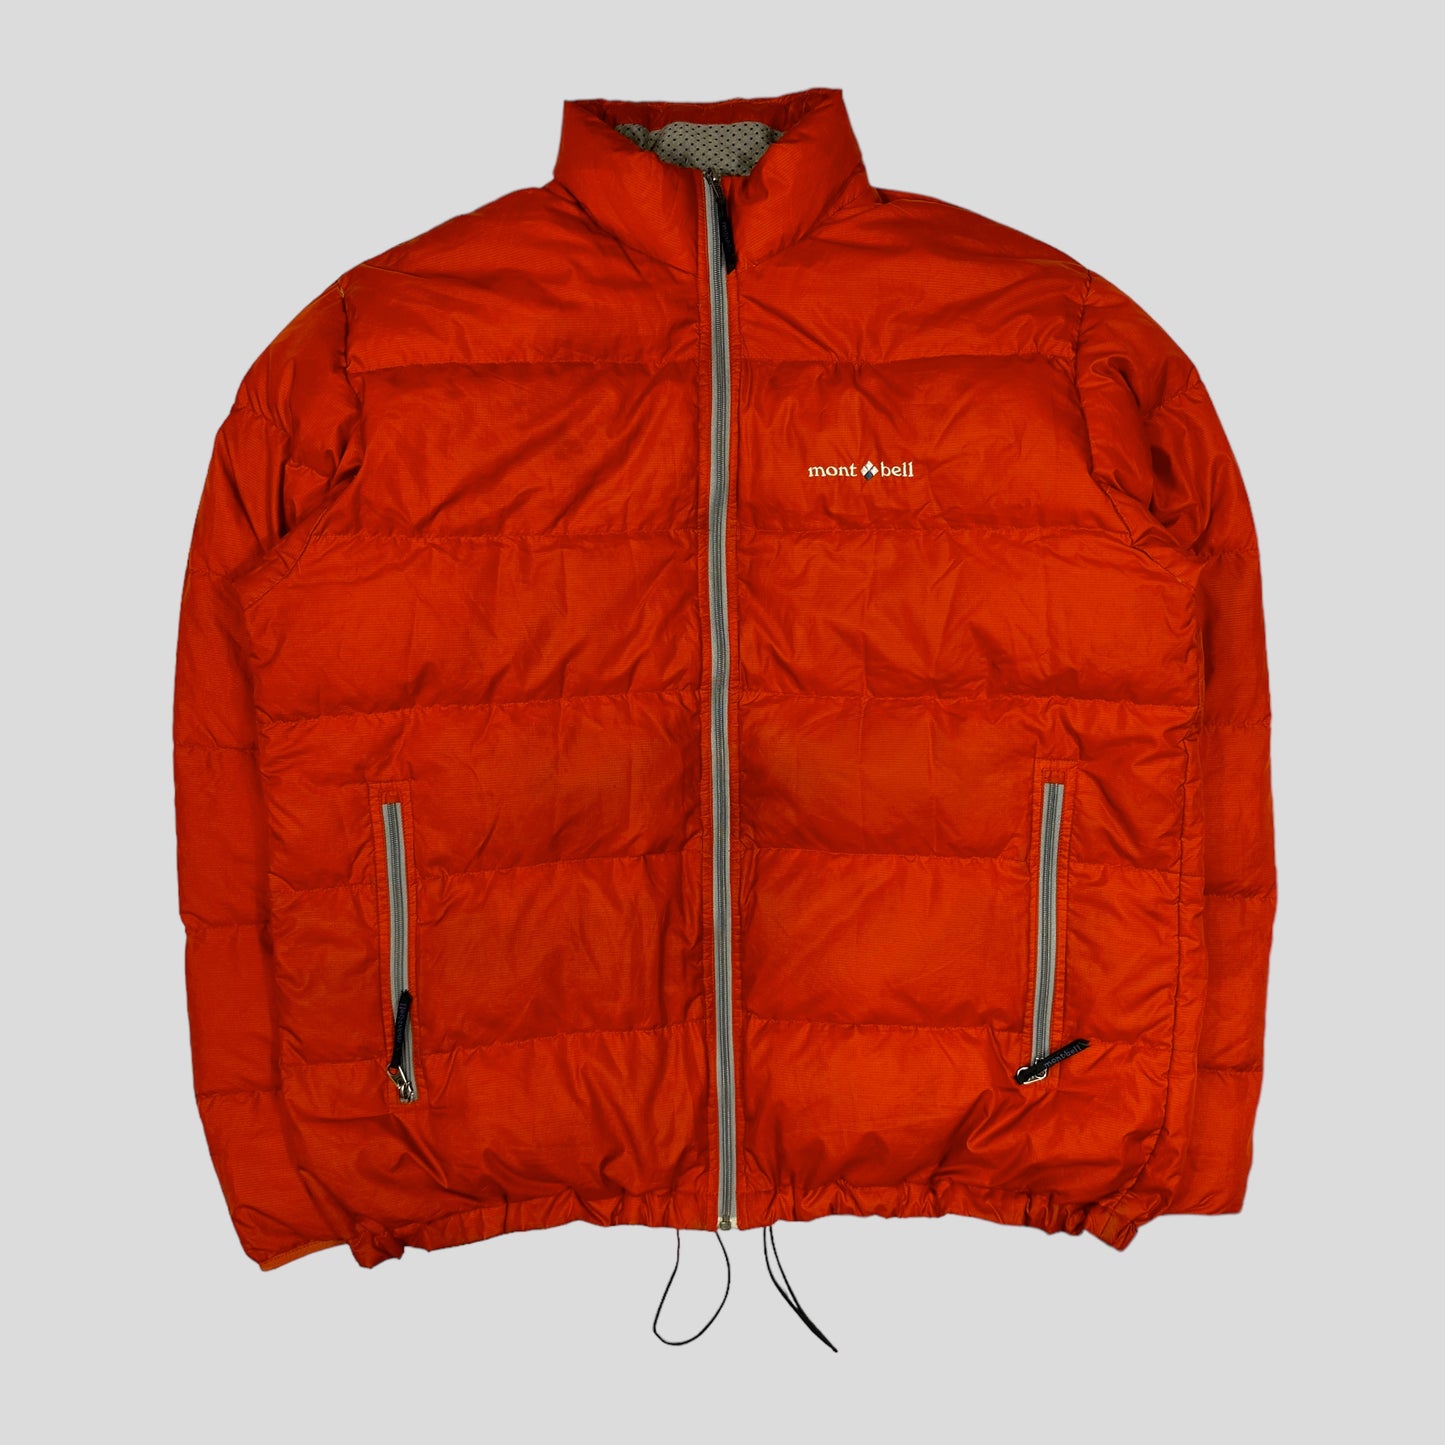 Montbell 00’s Orange & Grey Down Fill Puffer Jacket - XL